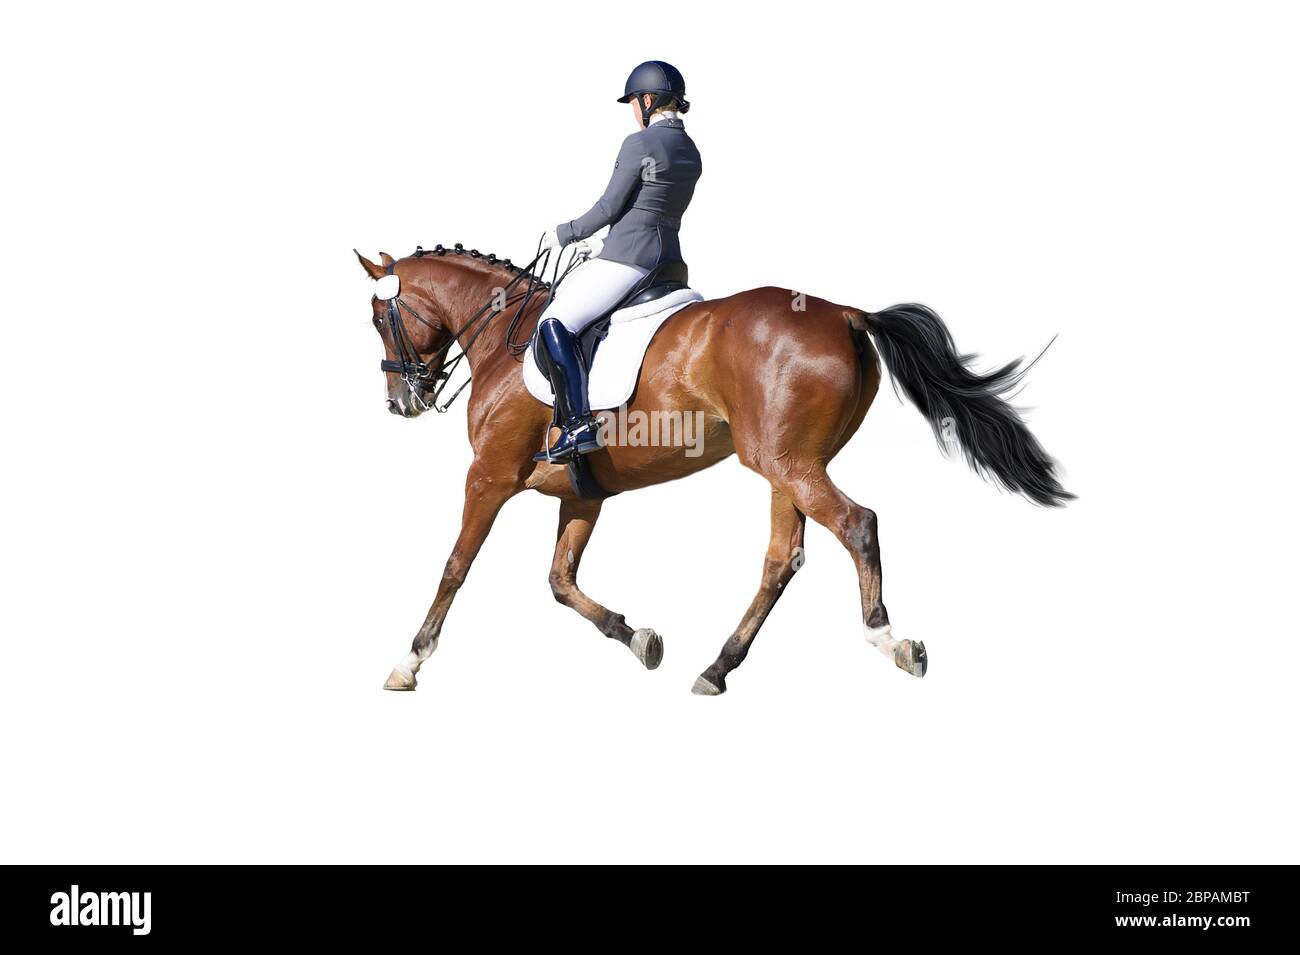 Equestrian sport - dressage rider portrait isolated on white Stock Photo